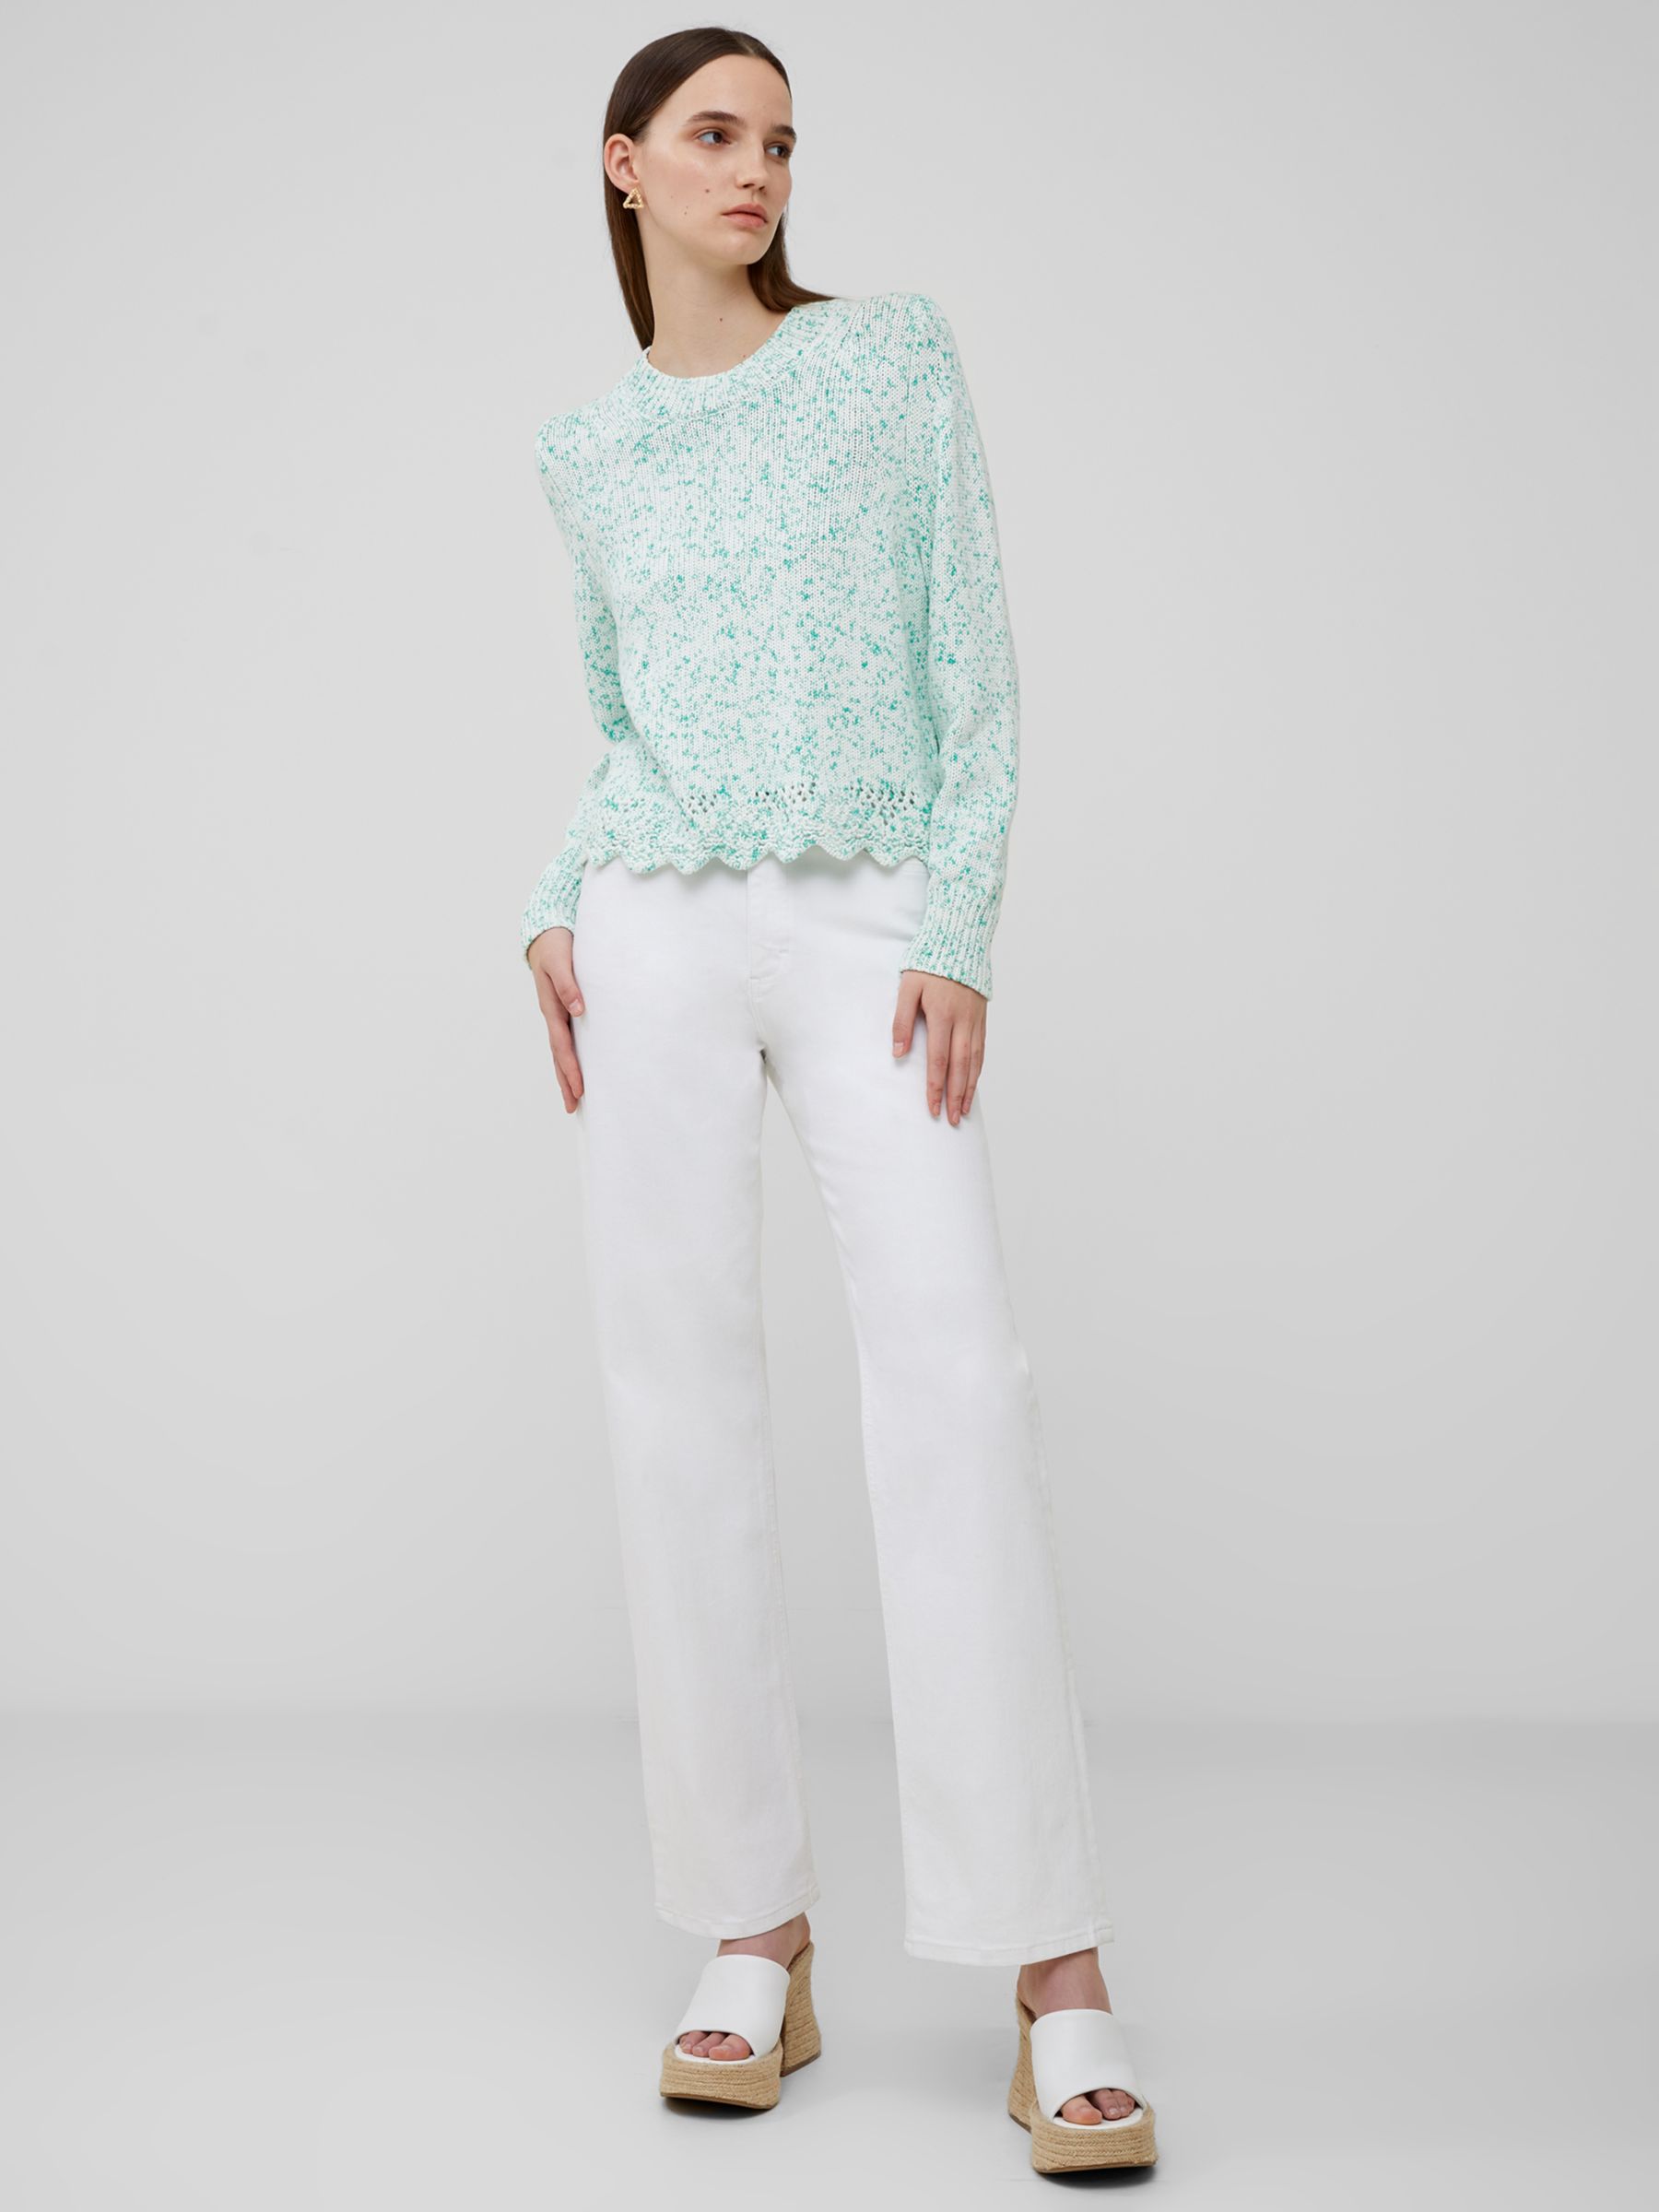 French Connection Nevanna Scallop Hem Jumper, Jelly Bean, M